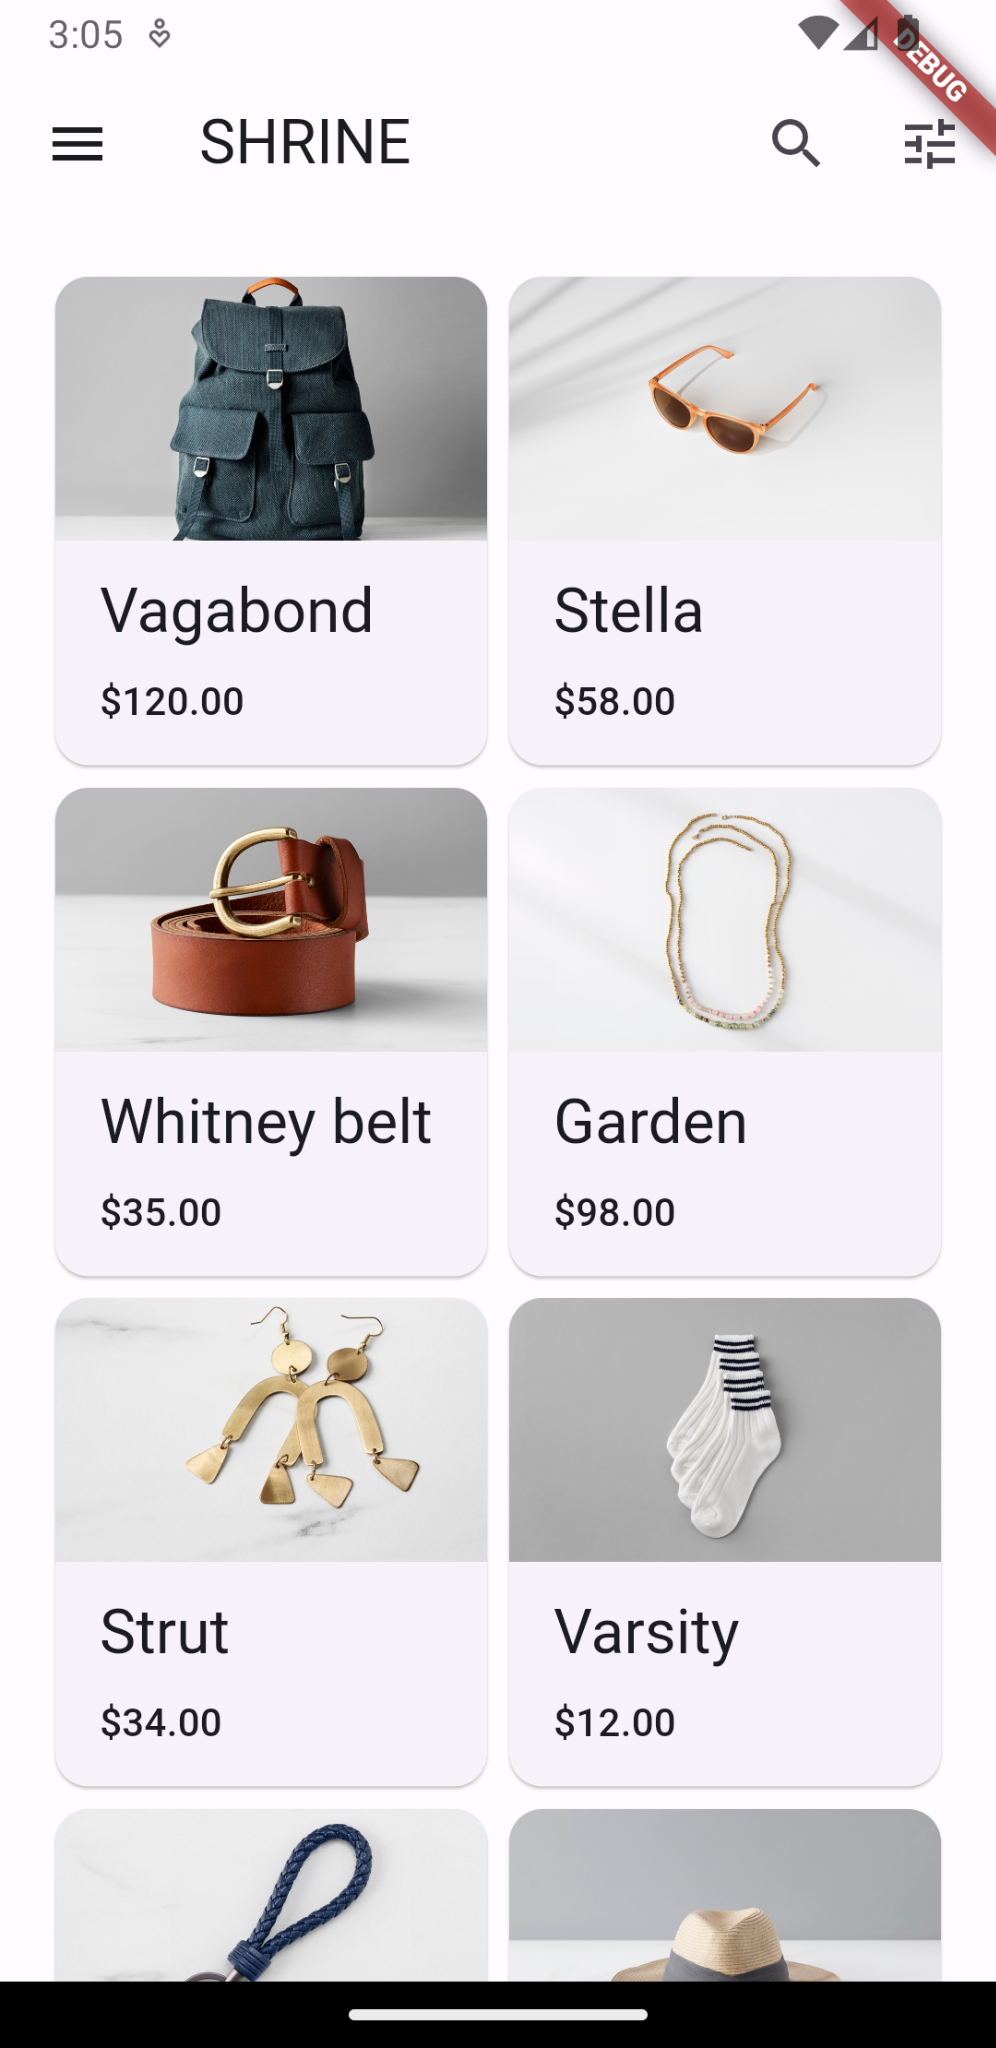 e-commerce app with a top app bar and a grid full of products